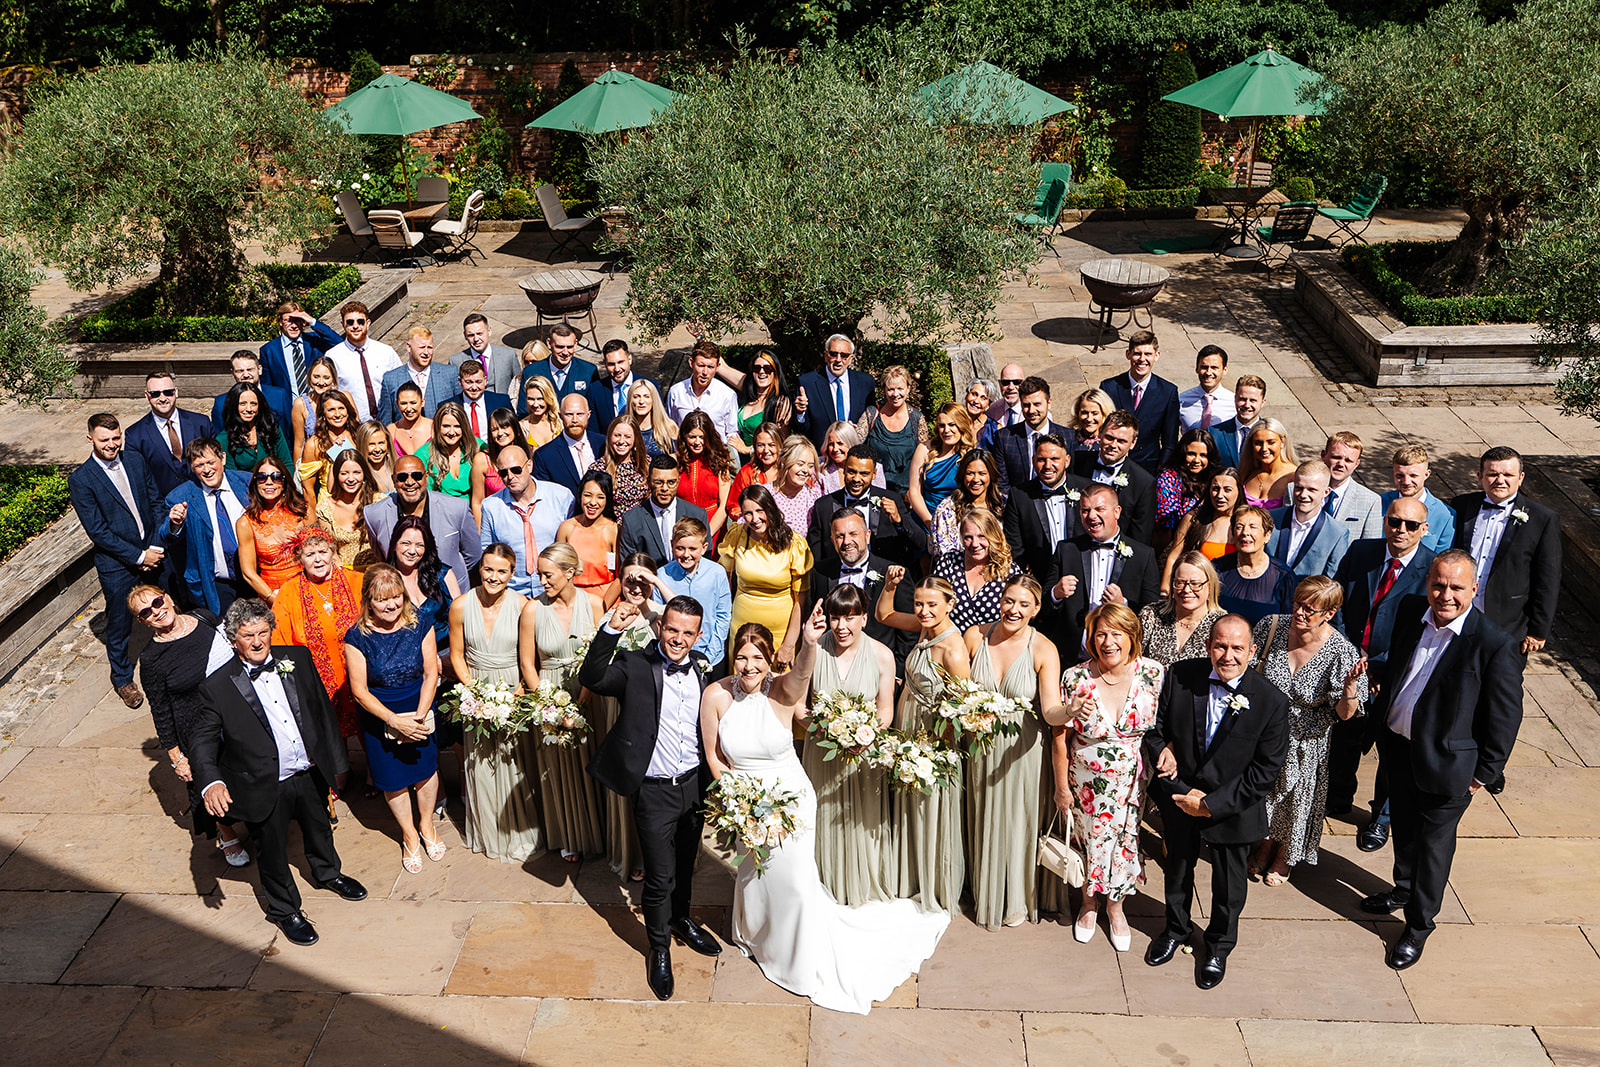 Group shot of all guests with bride and groom center 